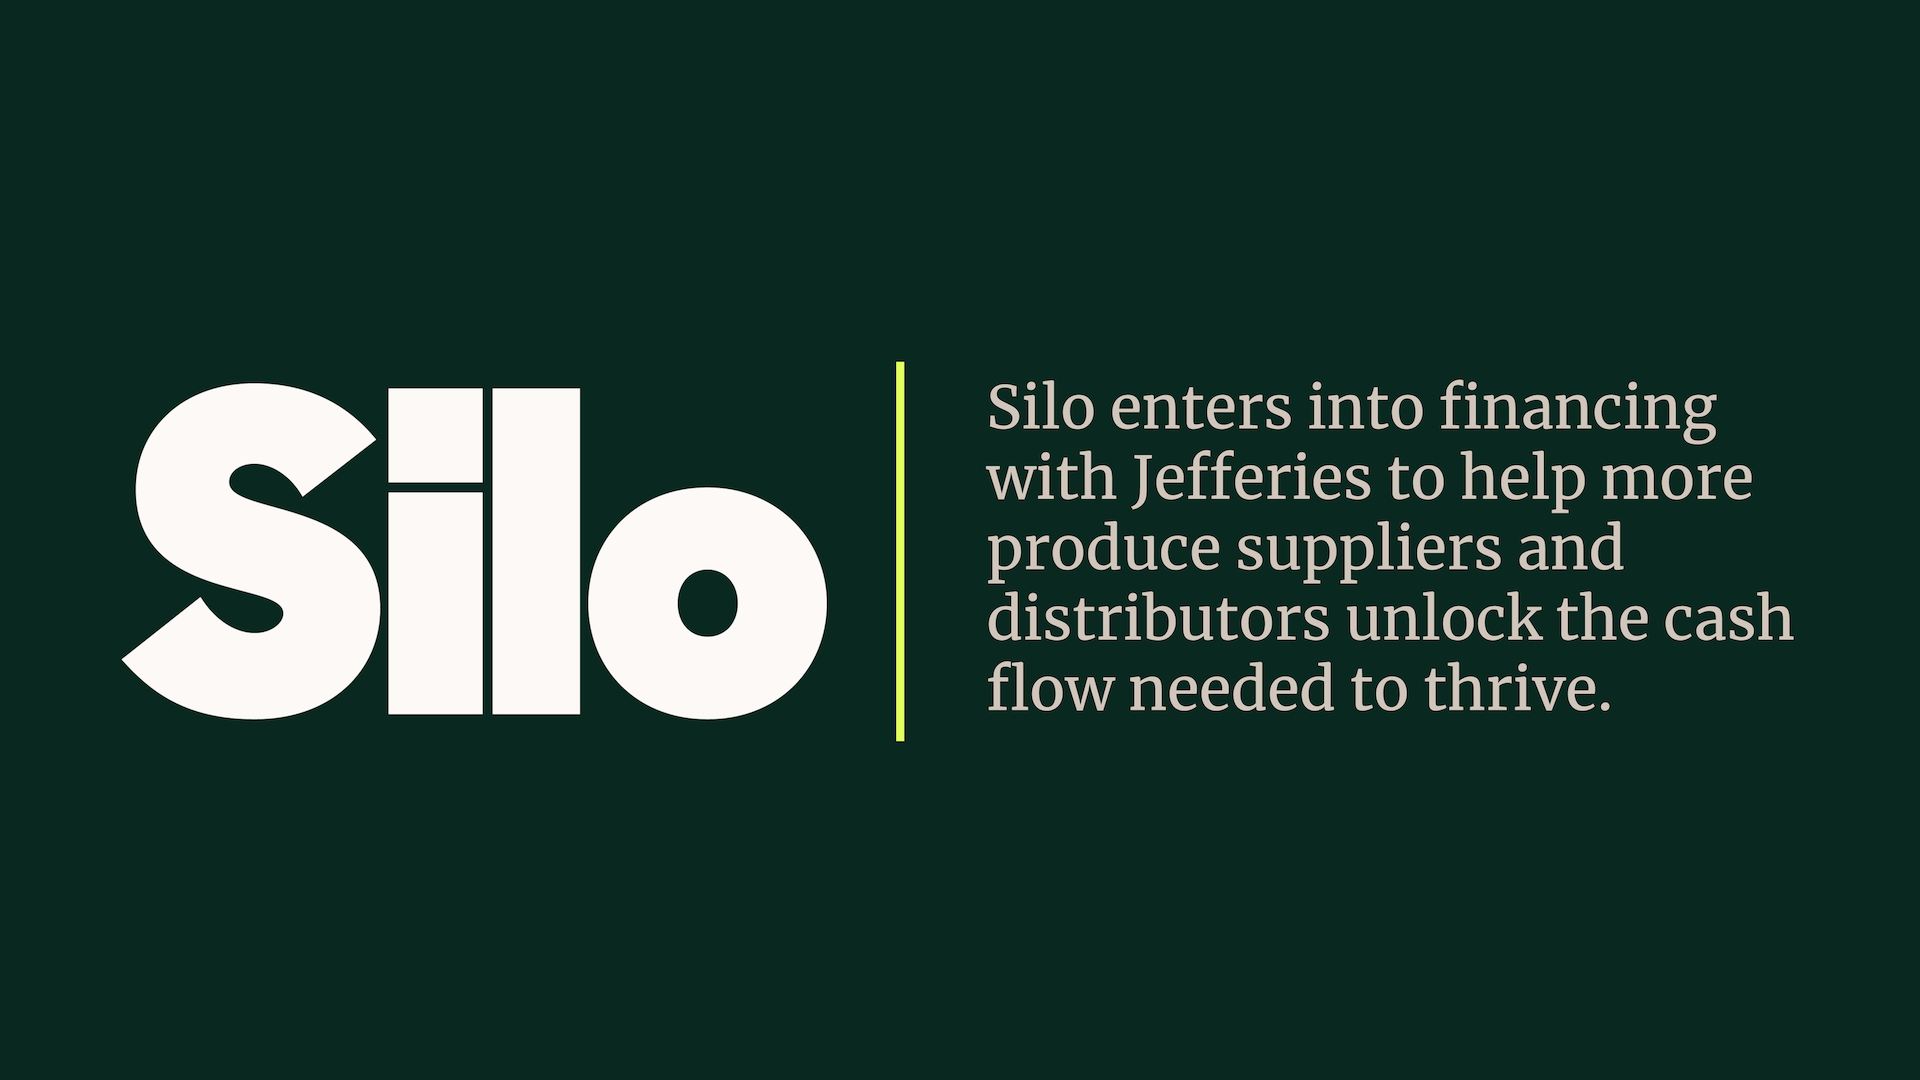 Silo Enters into Financing with Jefferies to Help More Produce Suppliers and Distributors Unlock the Cash Flow Needed to Thrive